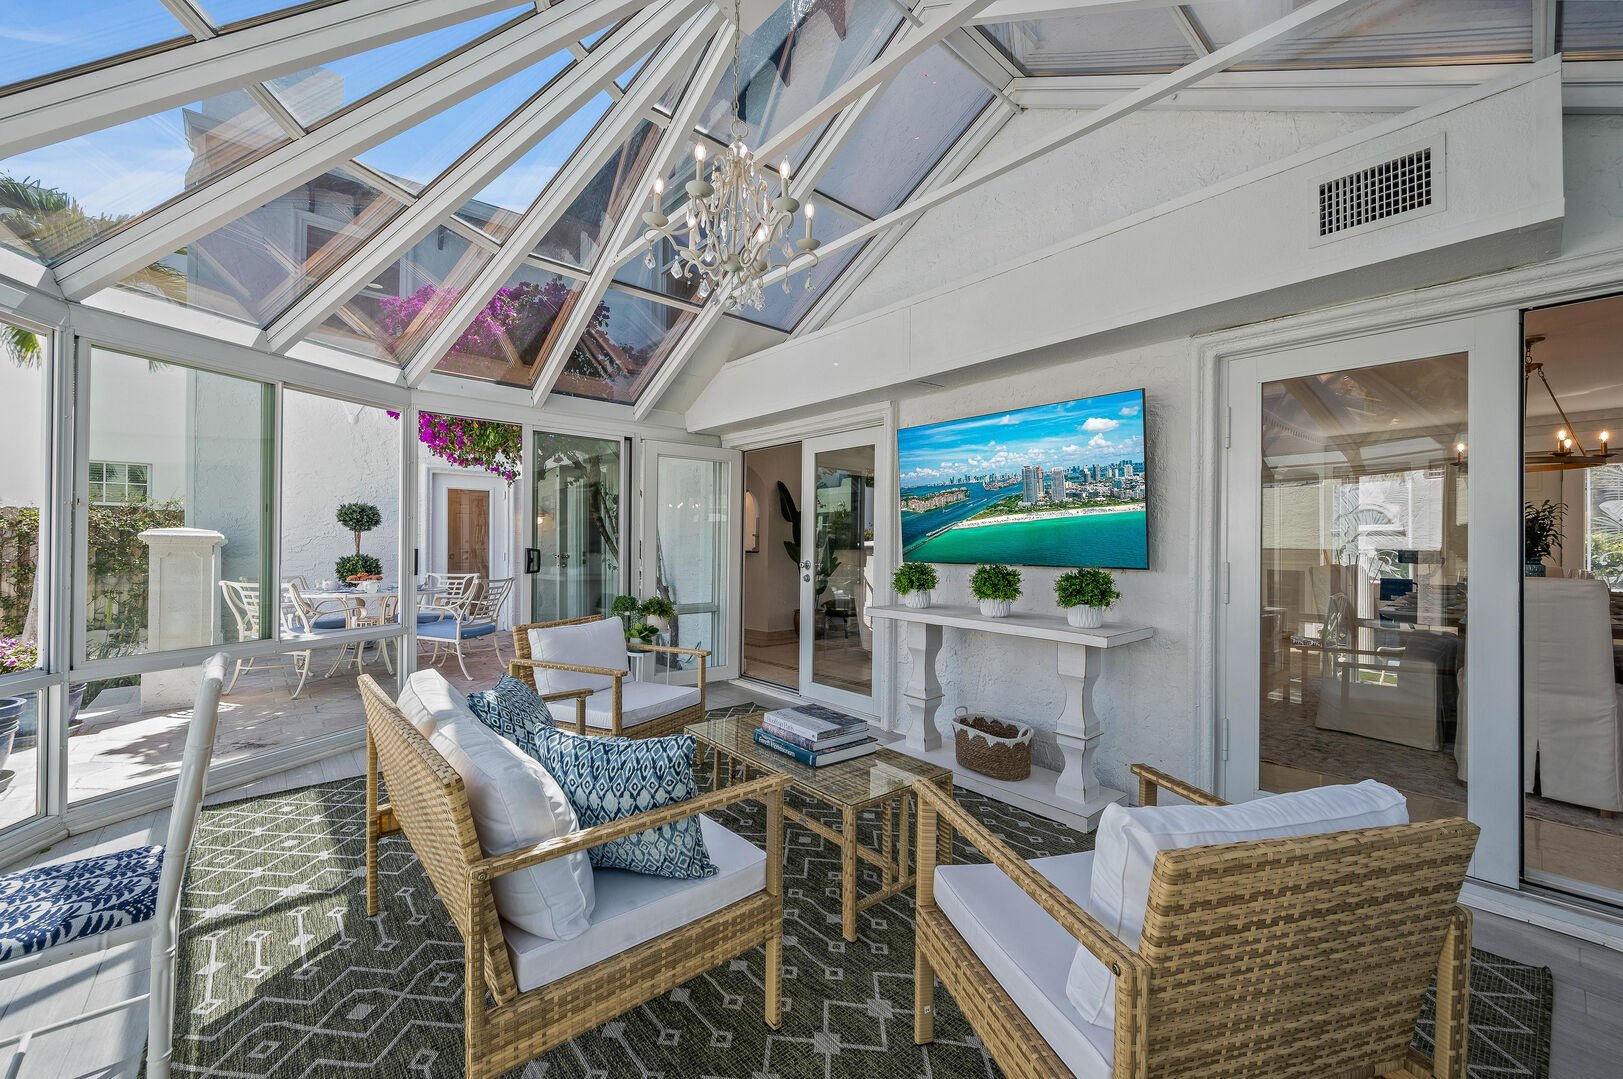 Basking in the warmth of the sunroom, where relaxation and natural light come together in perfect harmony. Enjoy your day watching the smart TV.